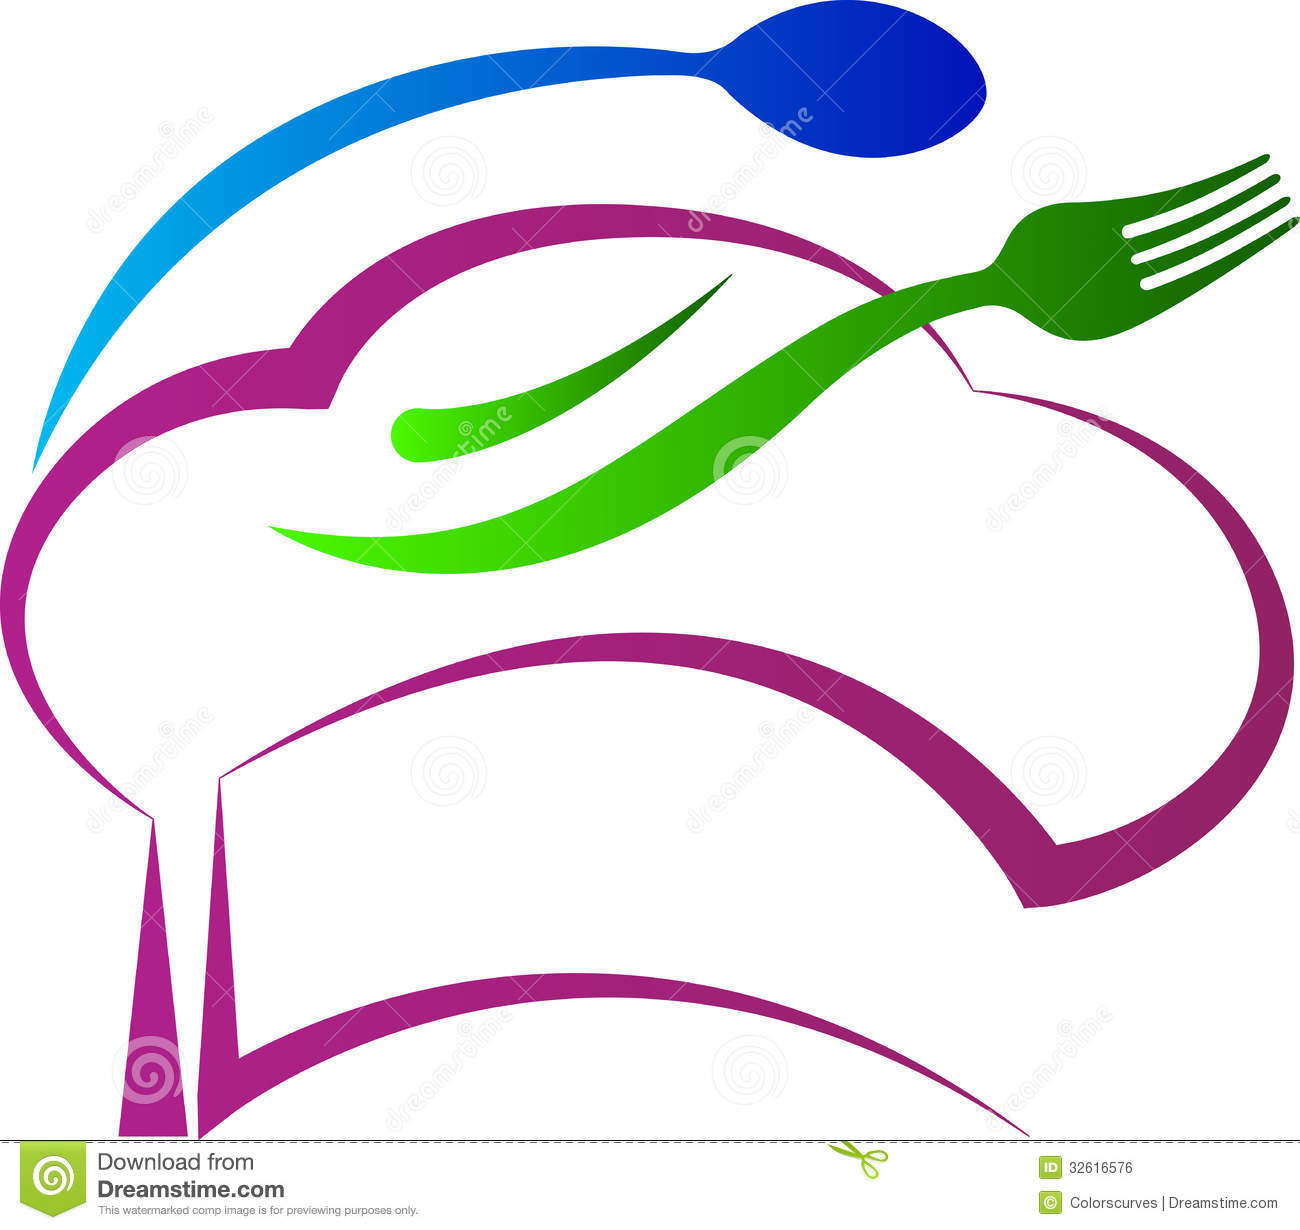 free clipart images chef hat - photo #28